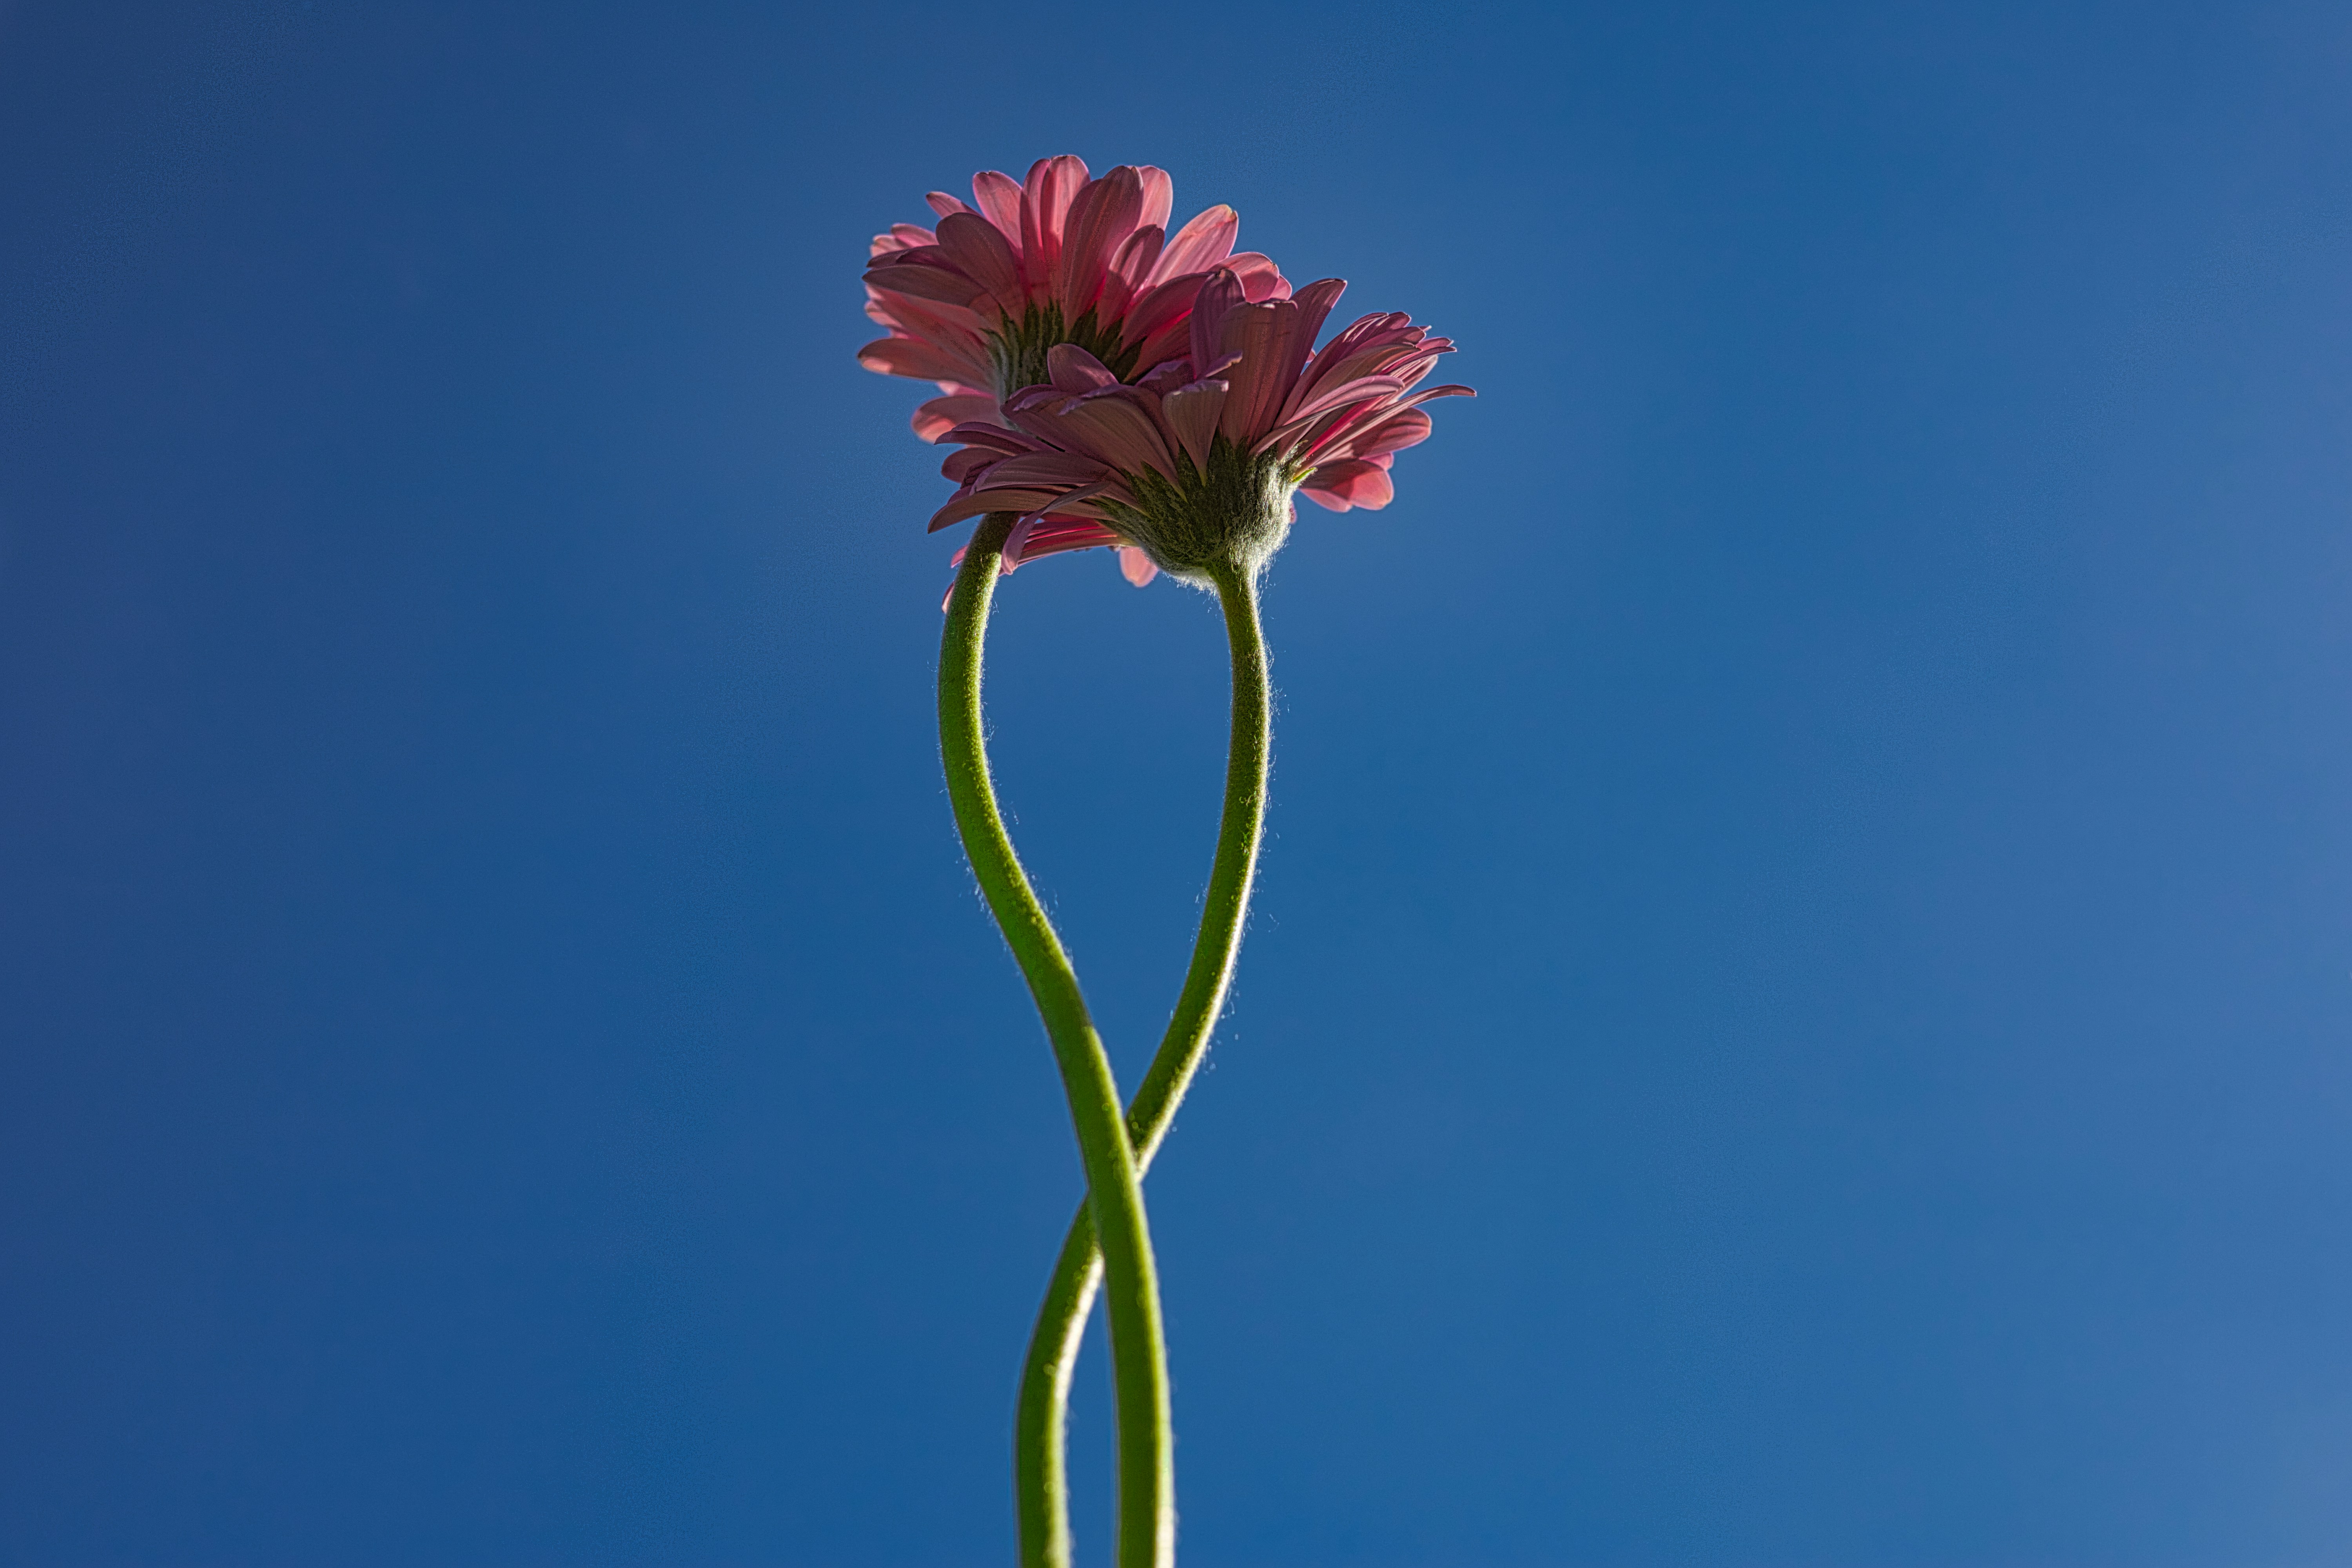 Two pink daisies, growing intertwined in front of a blue sky